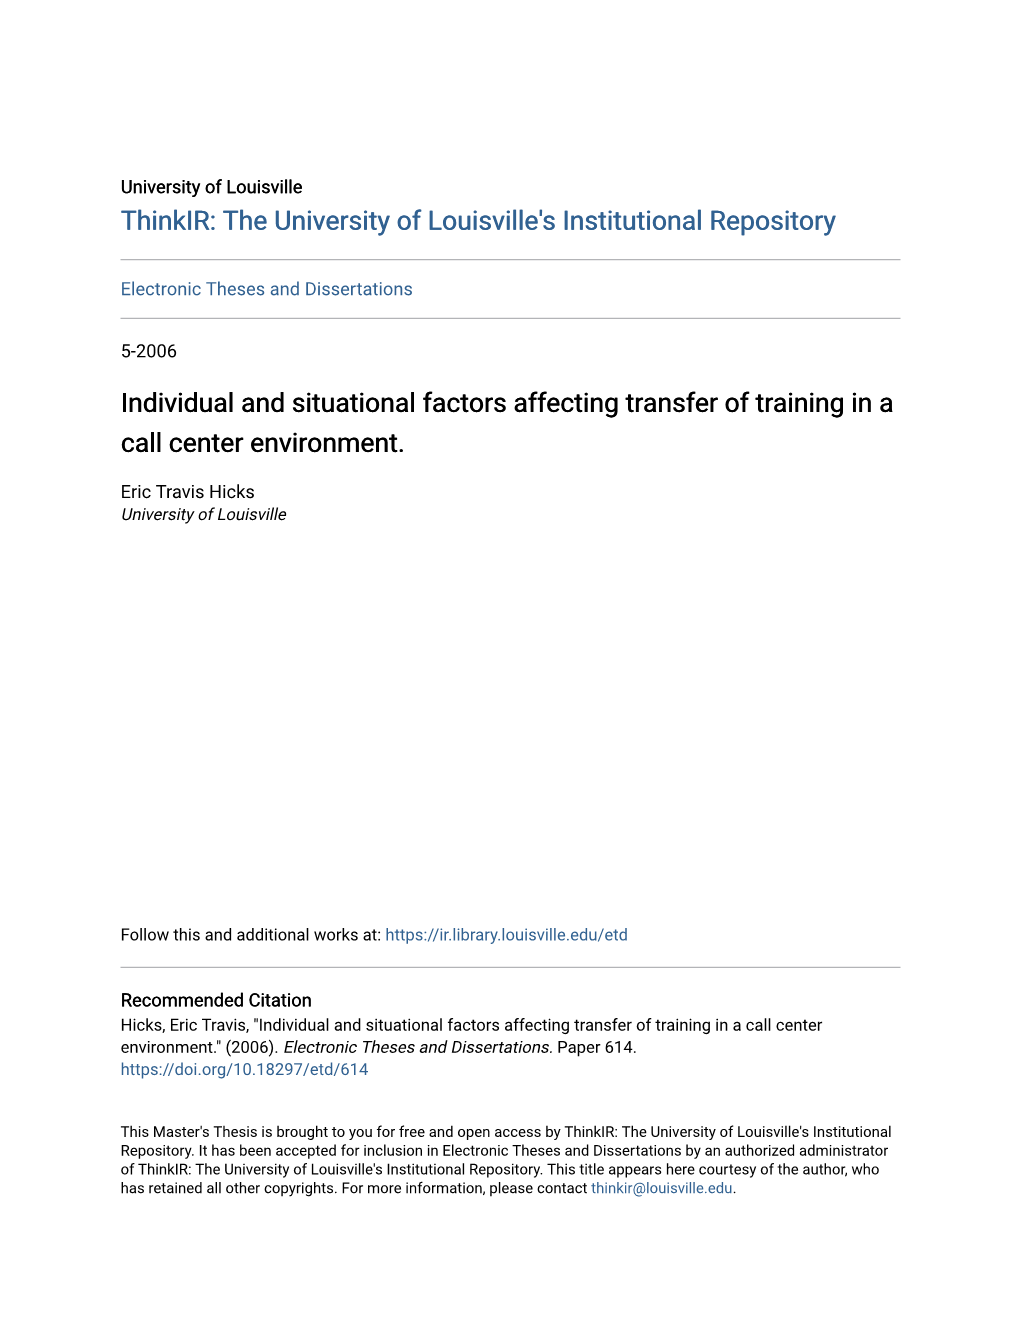 Individual and Situational Factors Affecting Transfer of Training in a Call Center Environment